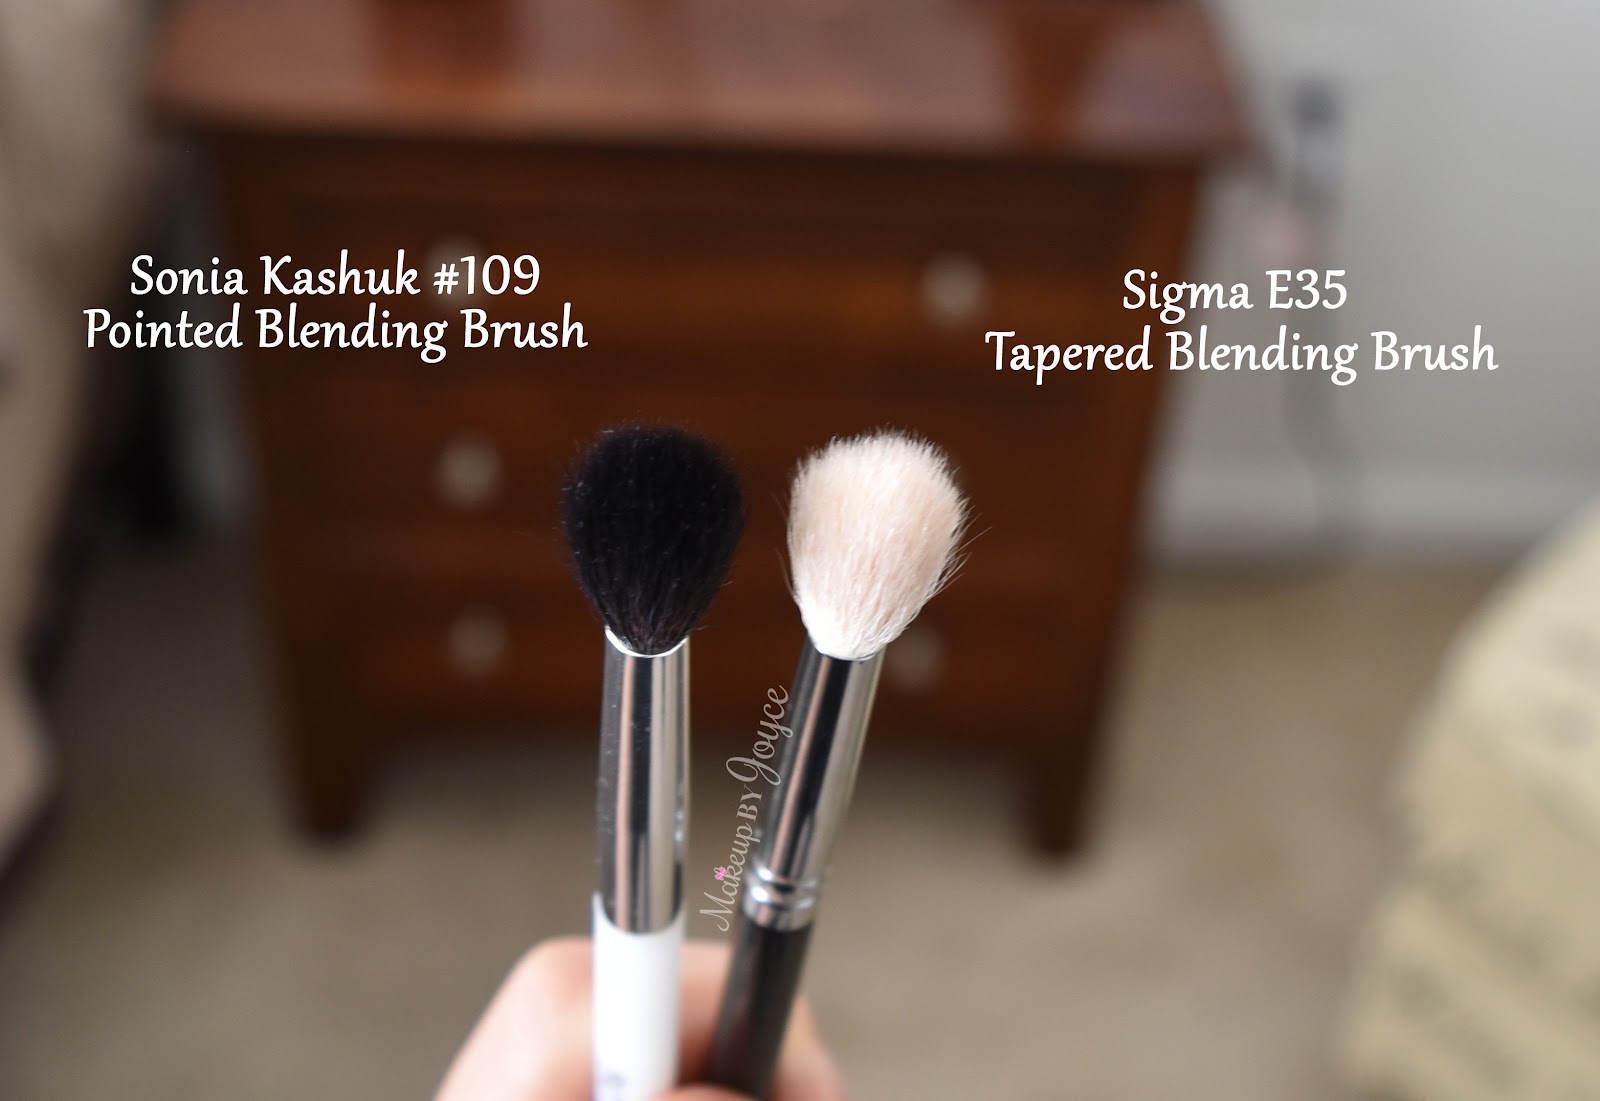 Tapered Crease Blending Brush E202 From Lashylicious